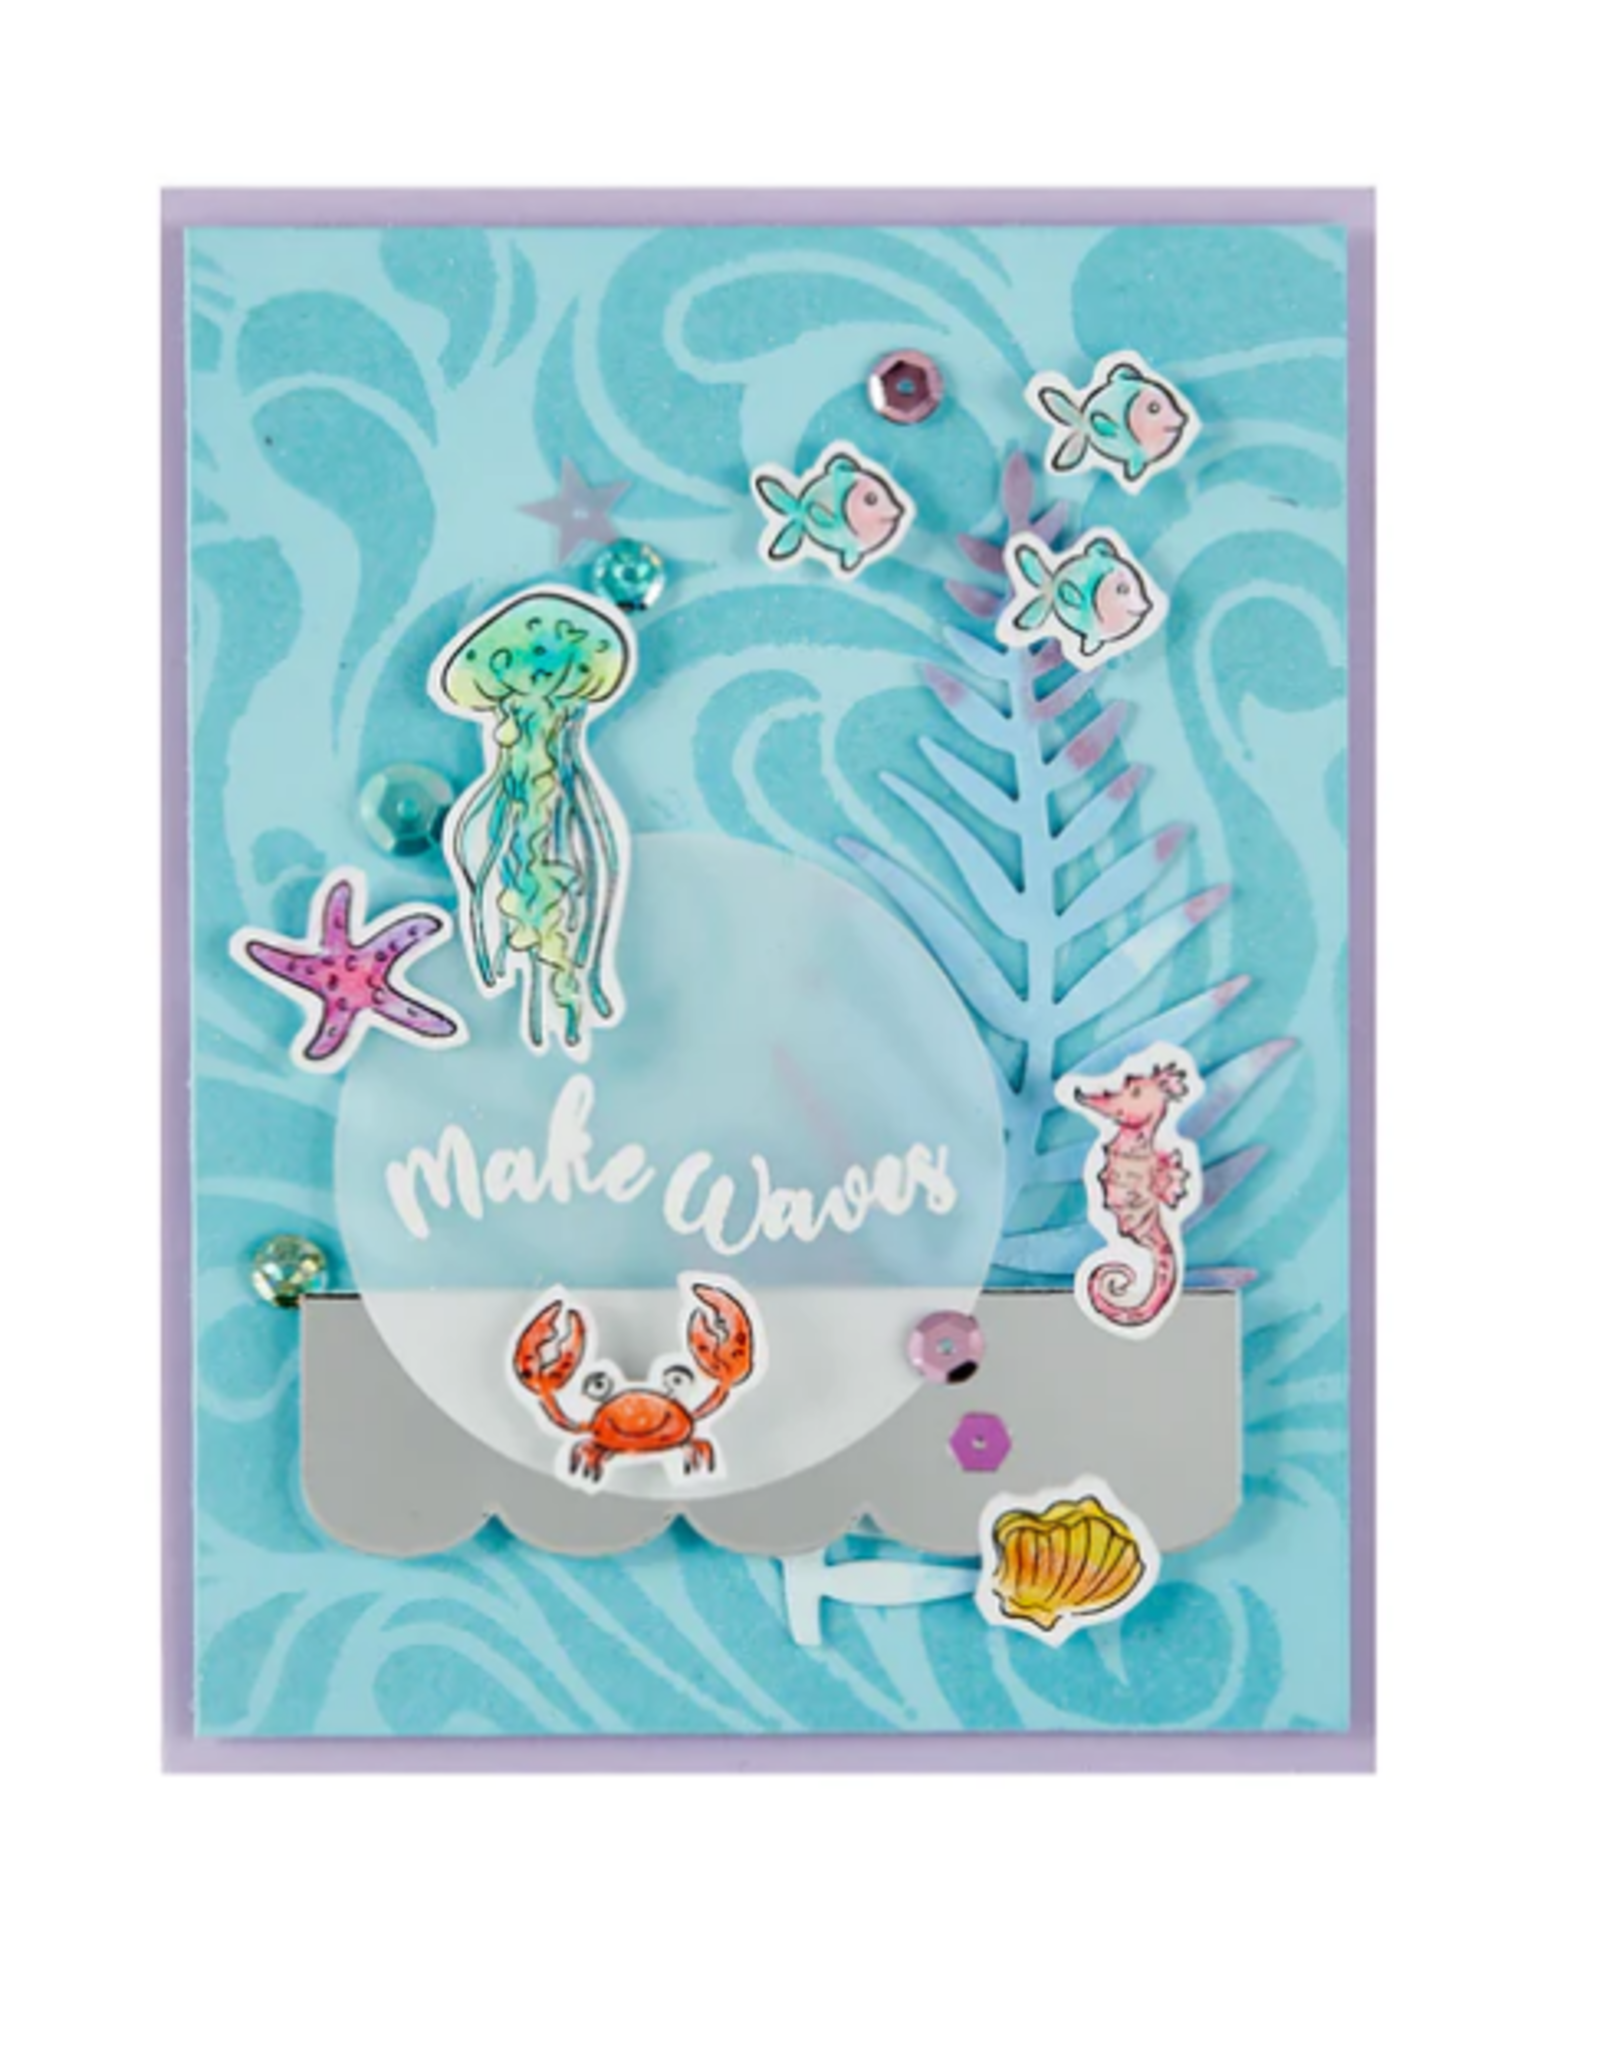 FUN STAMPERS JOURNEY FUN STAMPERS JOURNEY SPARKLE TRIO 8.5x11 SPECIALITY PAPER PACK